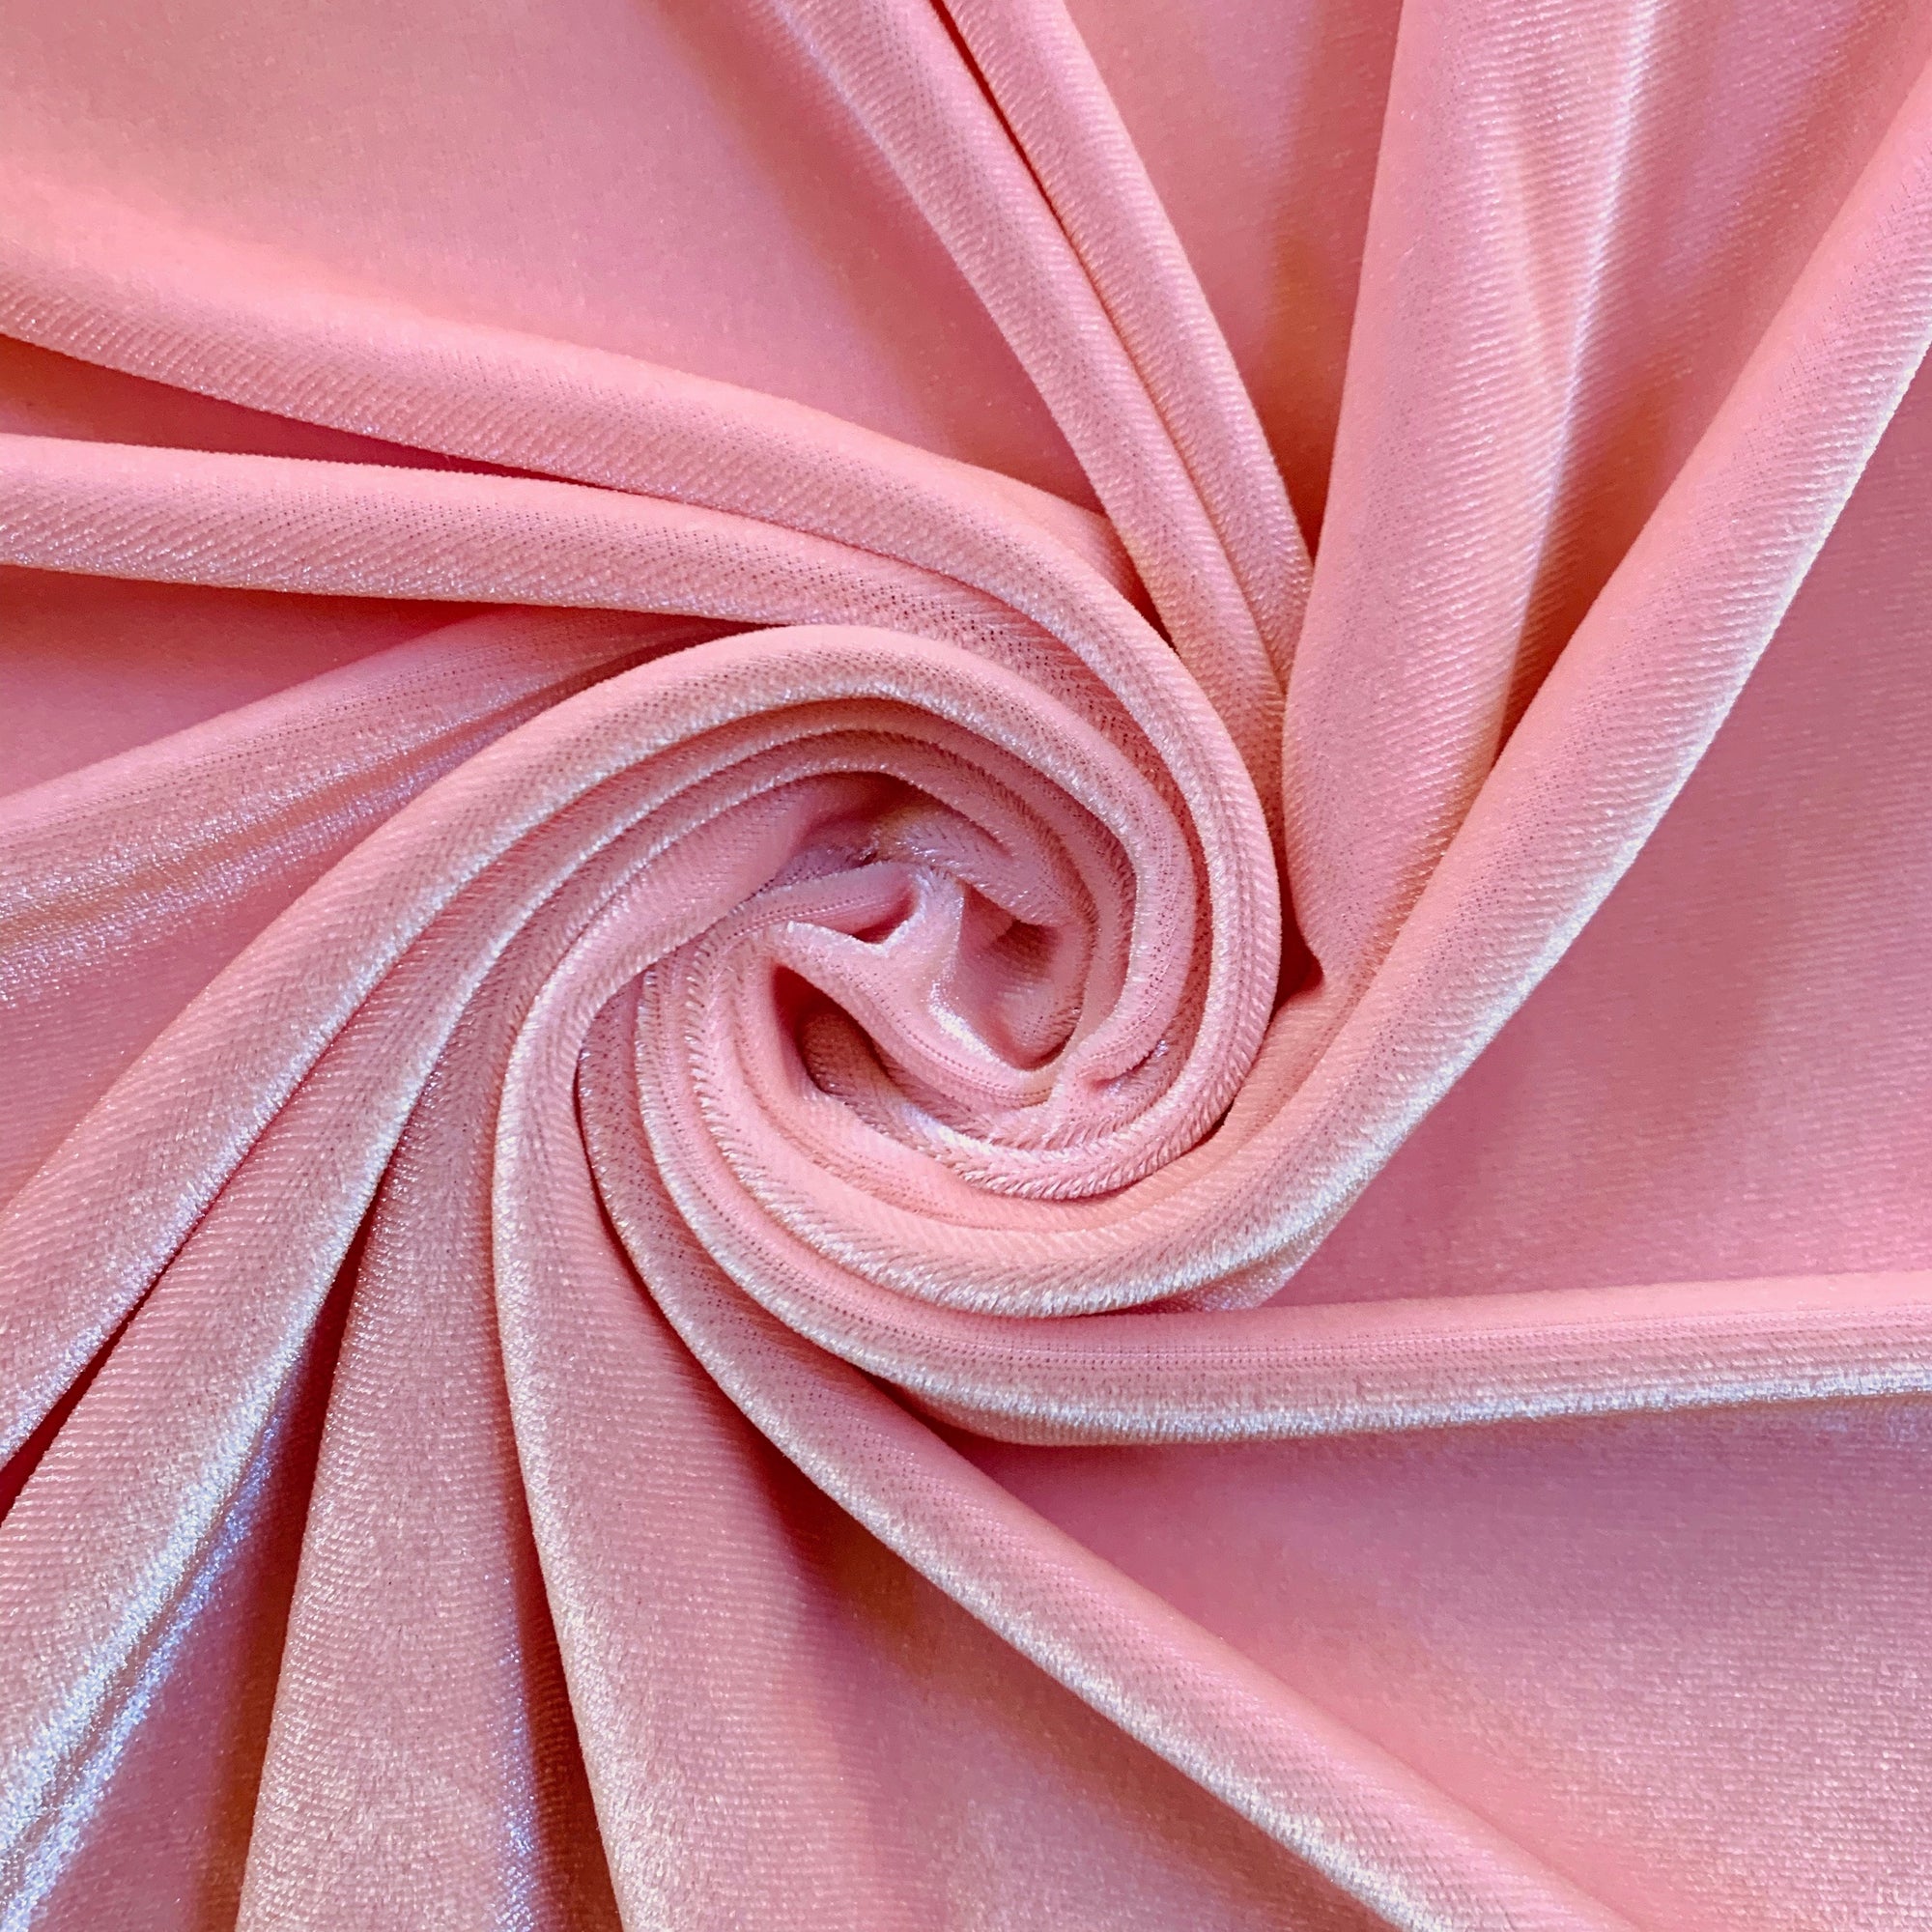 Princess LIGHT PINK Polyester Stretch Velvet Fabric for Bows, Top Knot -  New Fabrics Daily